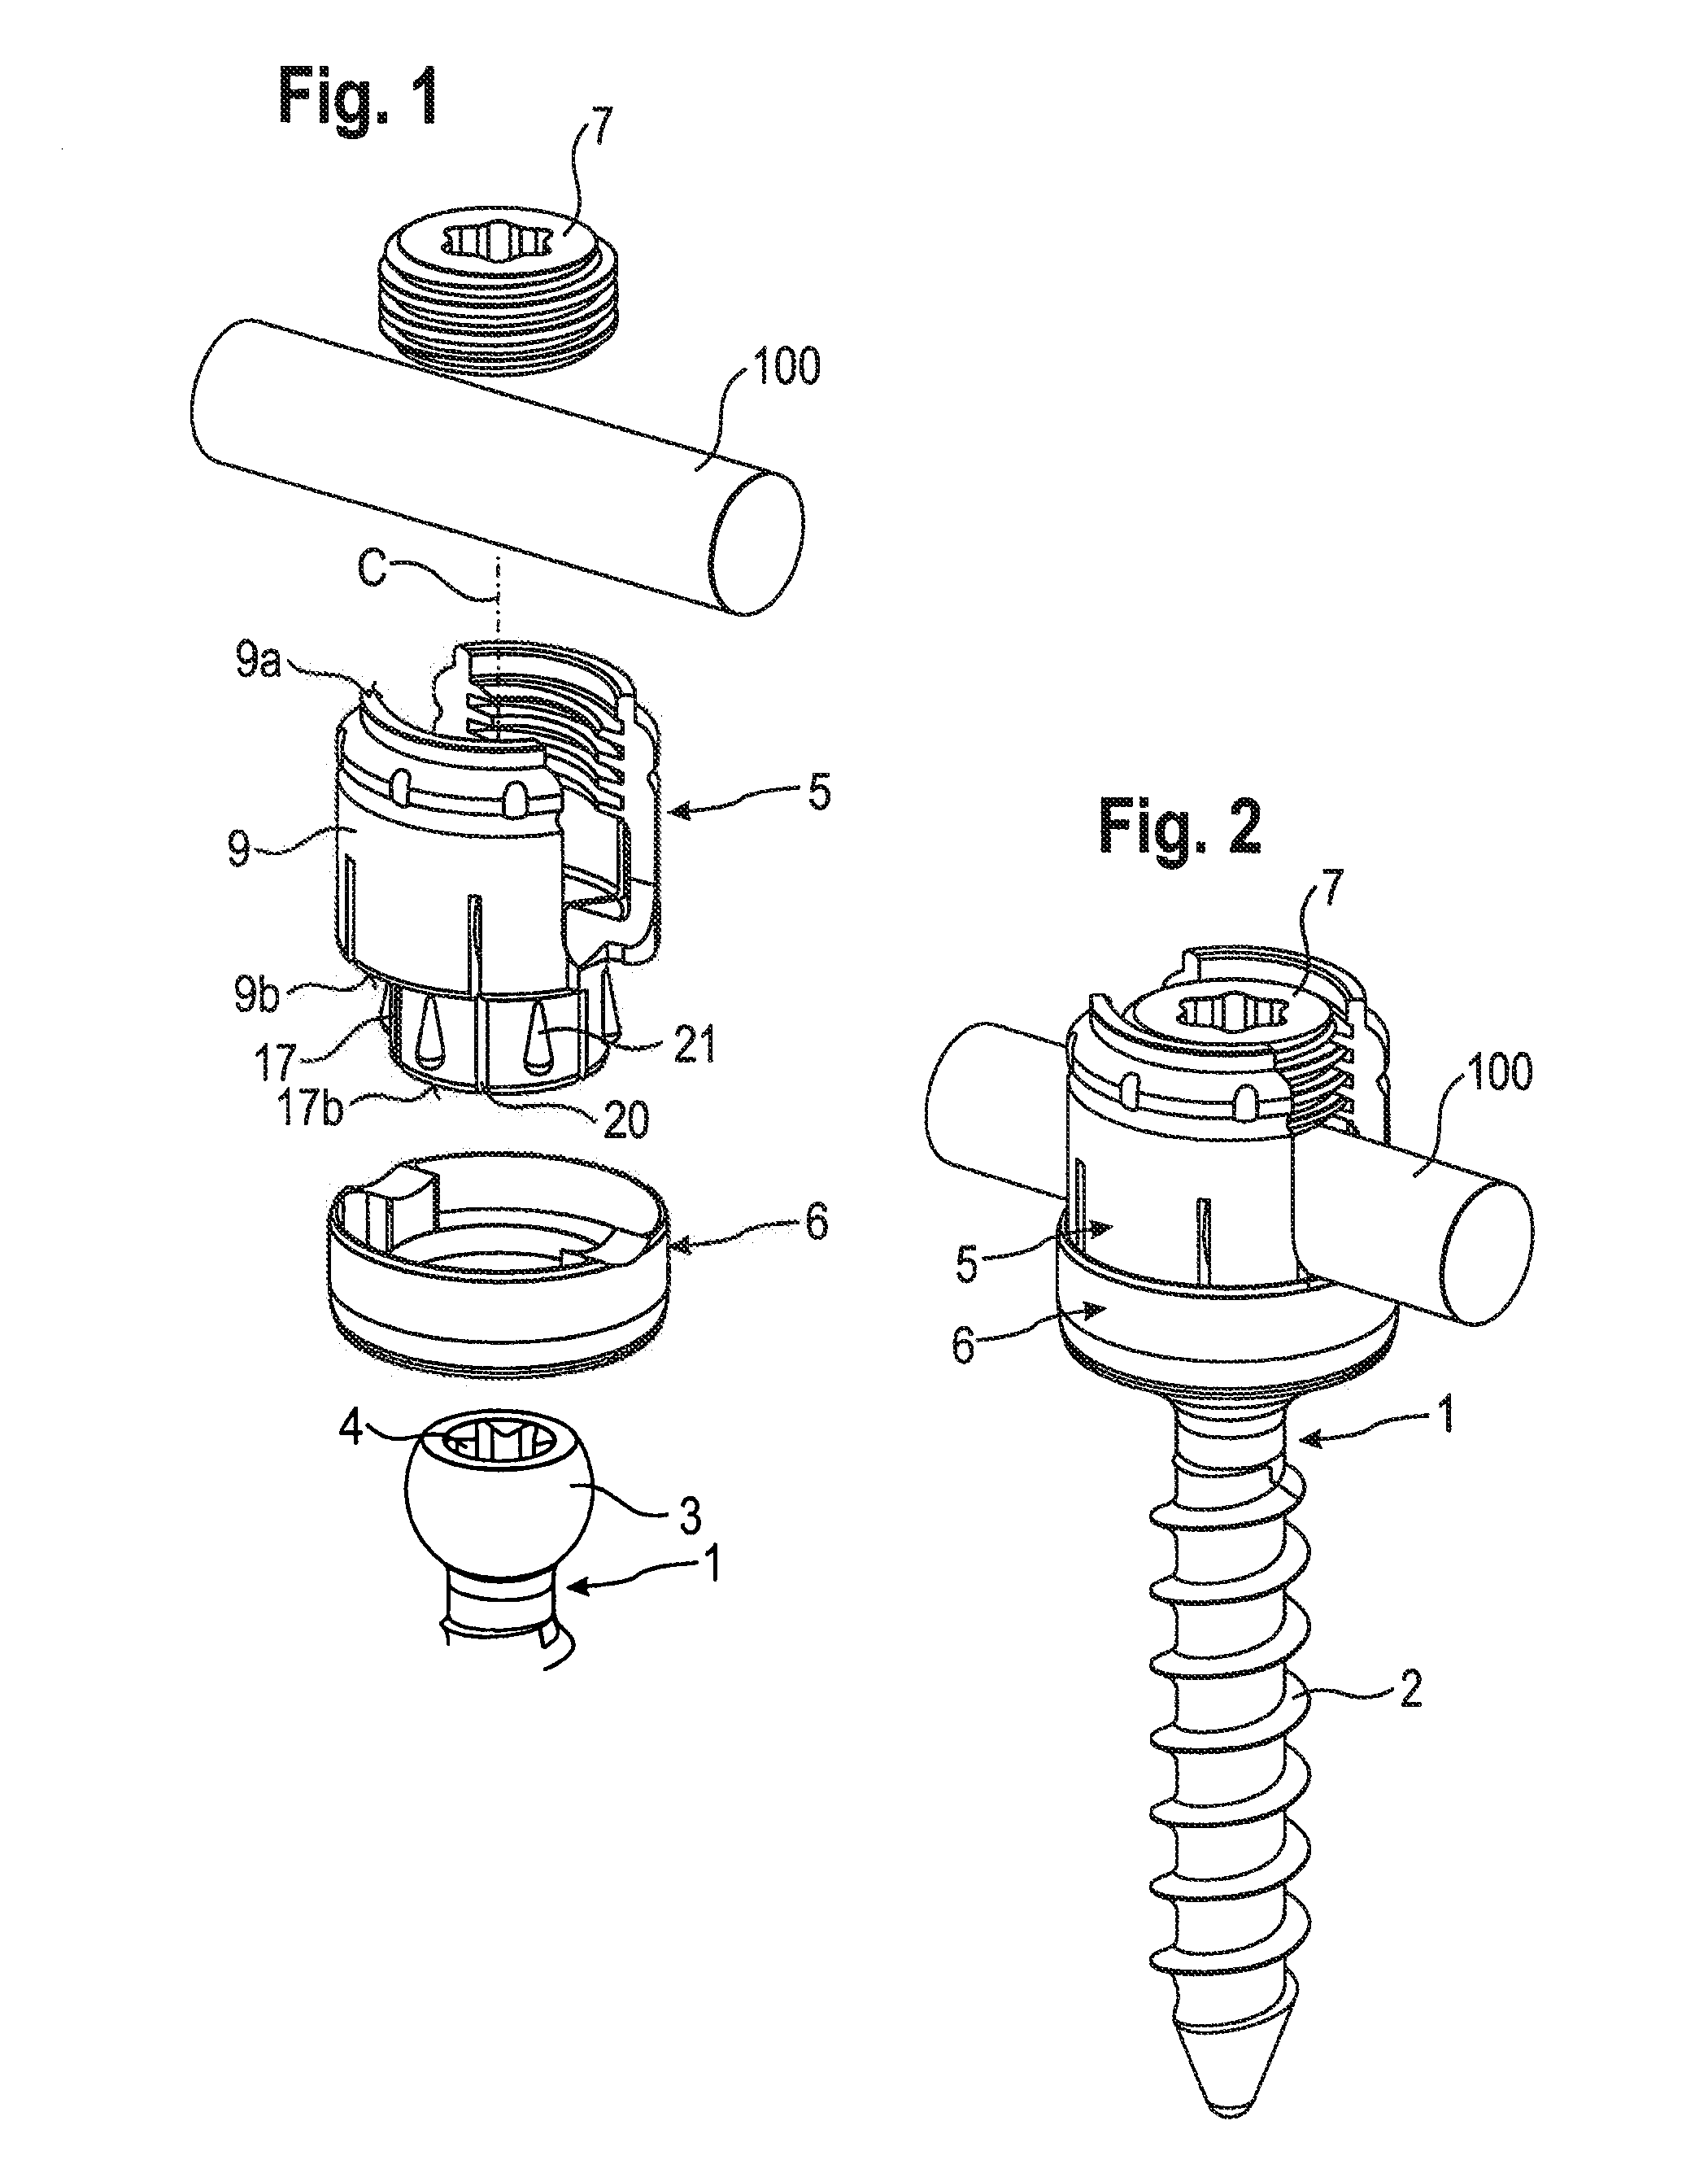 Receiving part for receiving a rod for coupling the rod to a bone anchoring element and a bone anchoring device